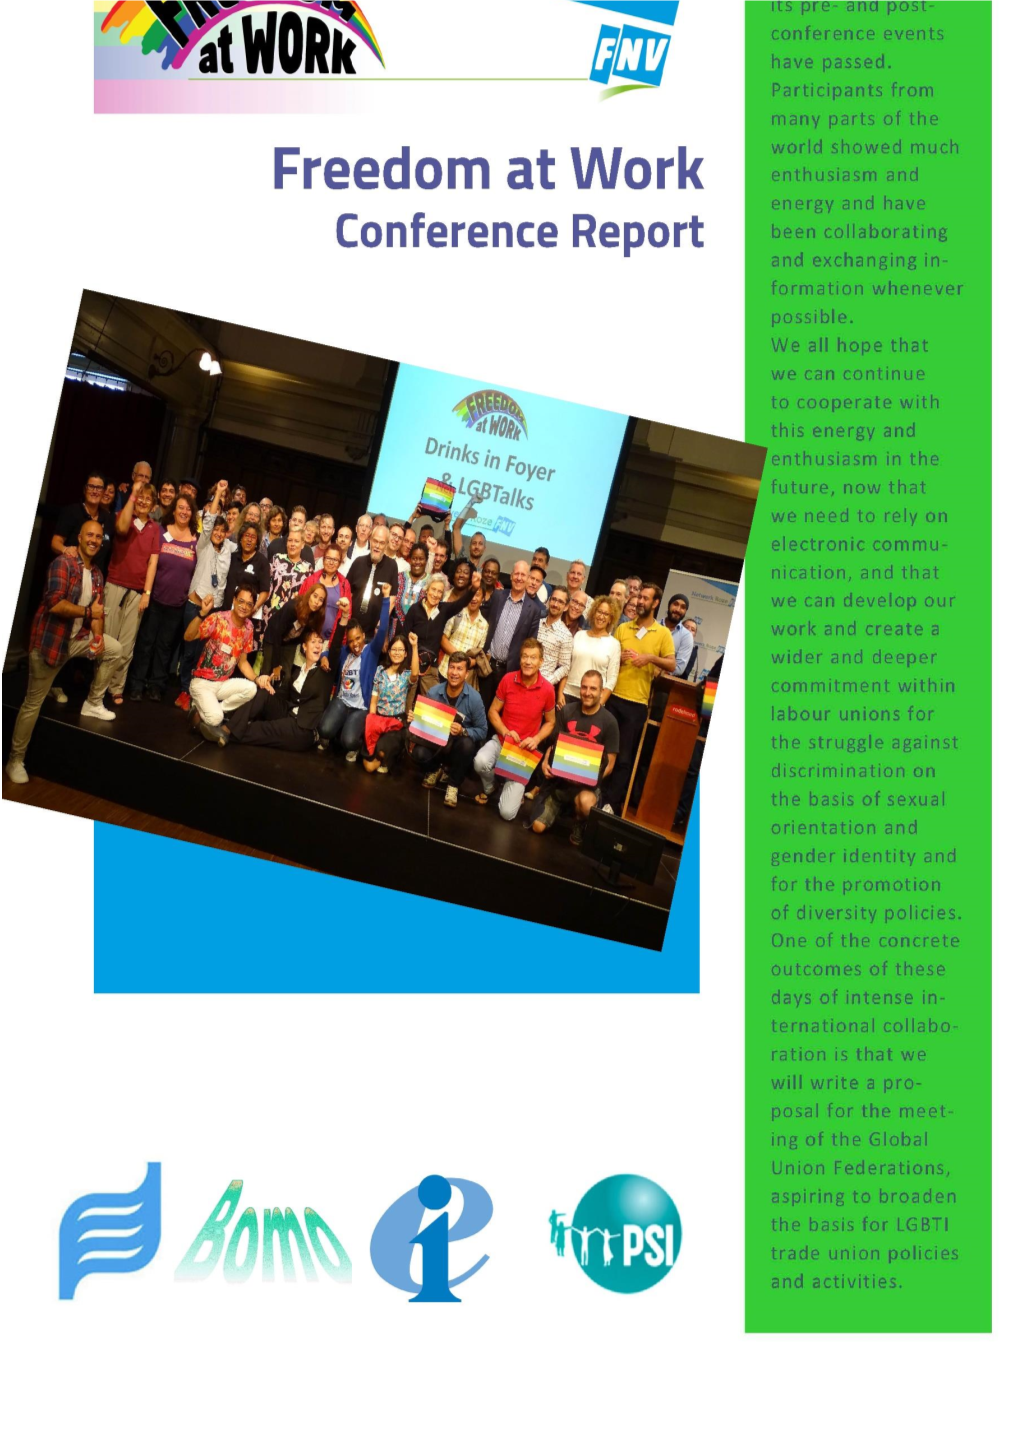 Conference Report Is Still Available for Download